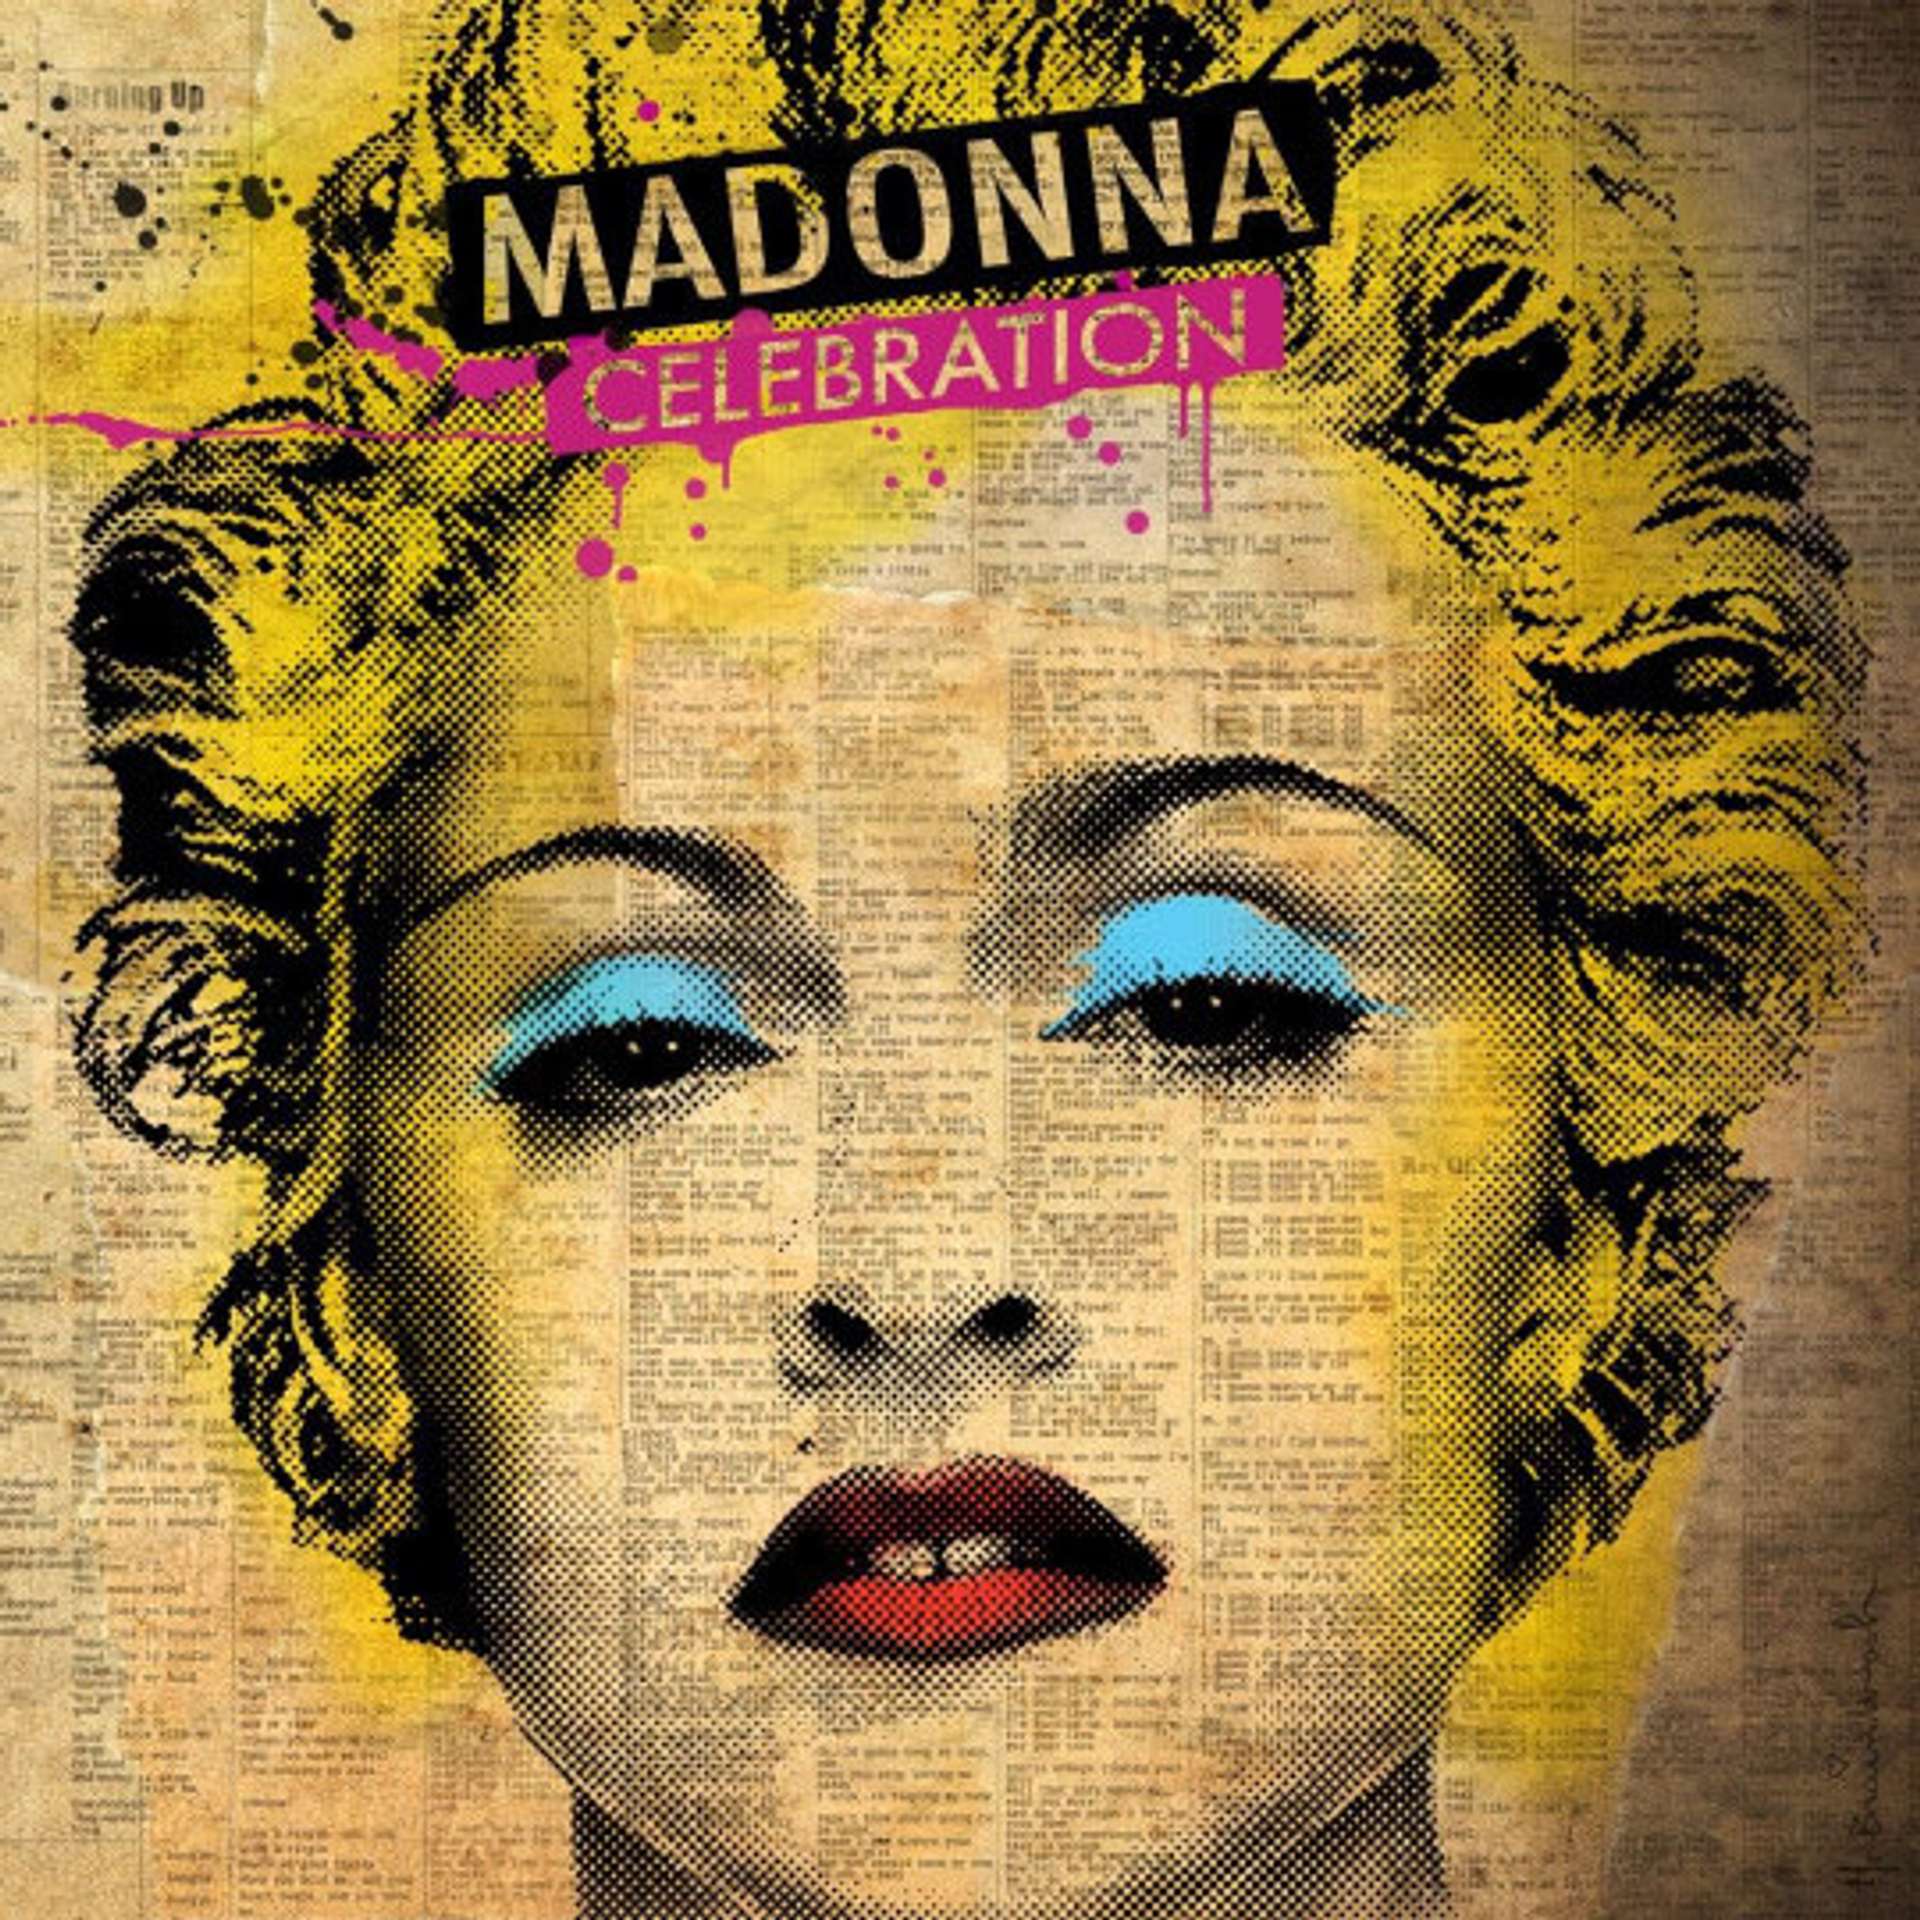 An image of the album cover for Celebrate by Mr. Brainwash, showing a graphic style close-up of the singer Madonna, stylised in a similar manner as Andy Warhol’s series of Marilyns. She is looking directly at the viewer, wearing red lipstick and blue eyeshadow and her hair is dyed bright yellow.